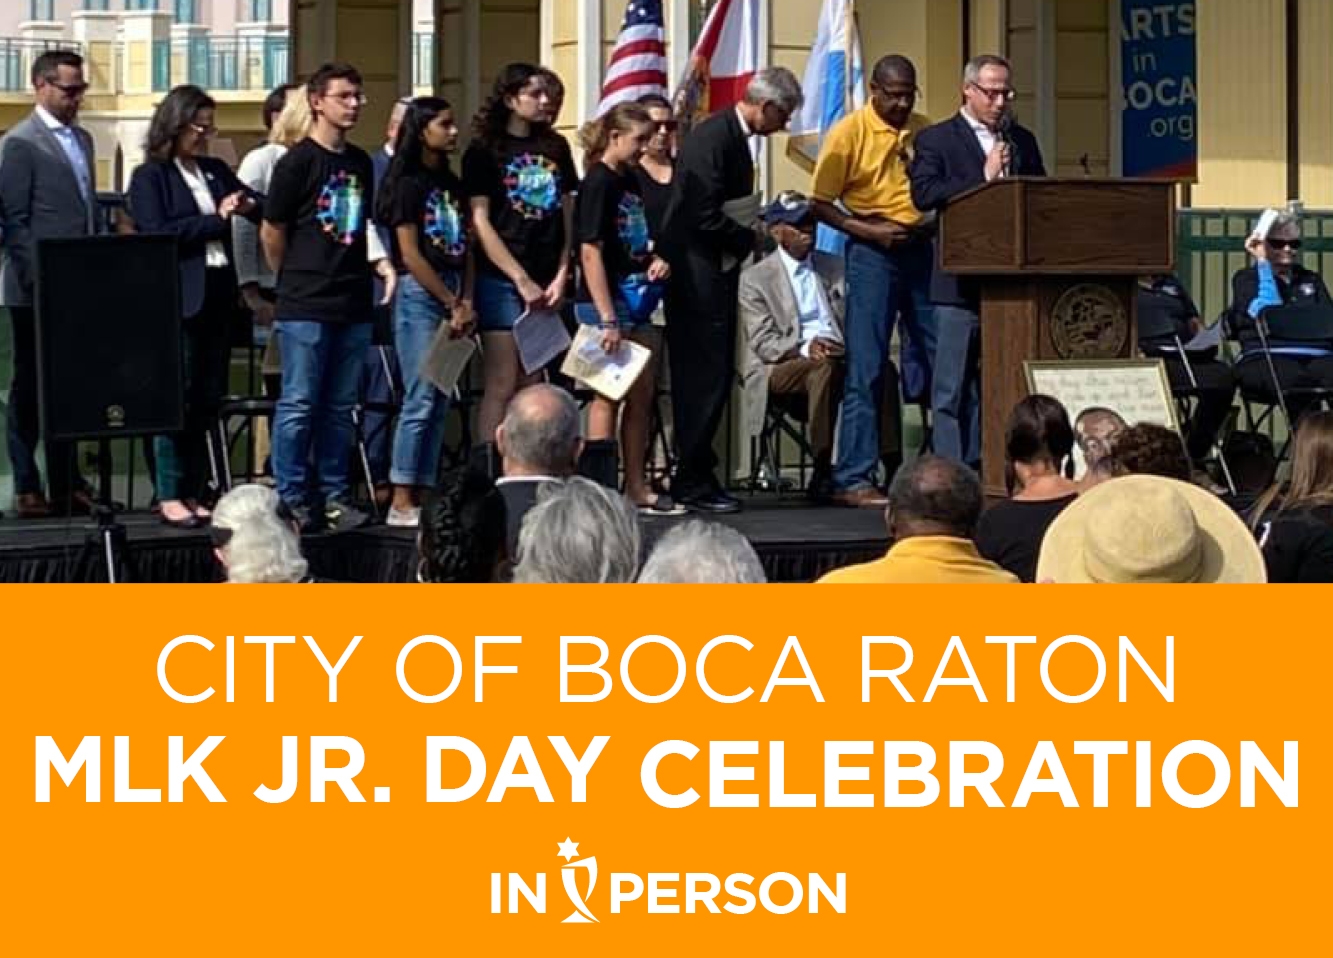 City of Boca Raton Martin Luther King Jr Day Celebration event graphic made for Temple Beth El of Boca Raton